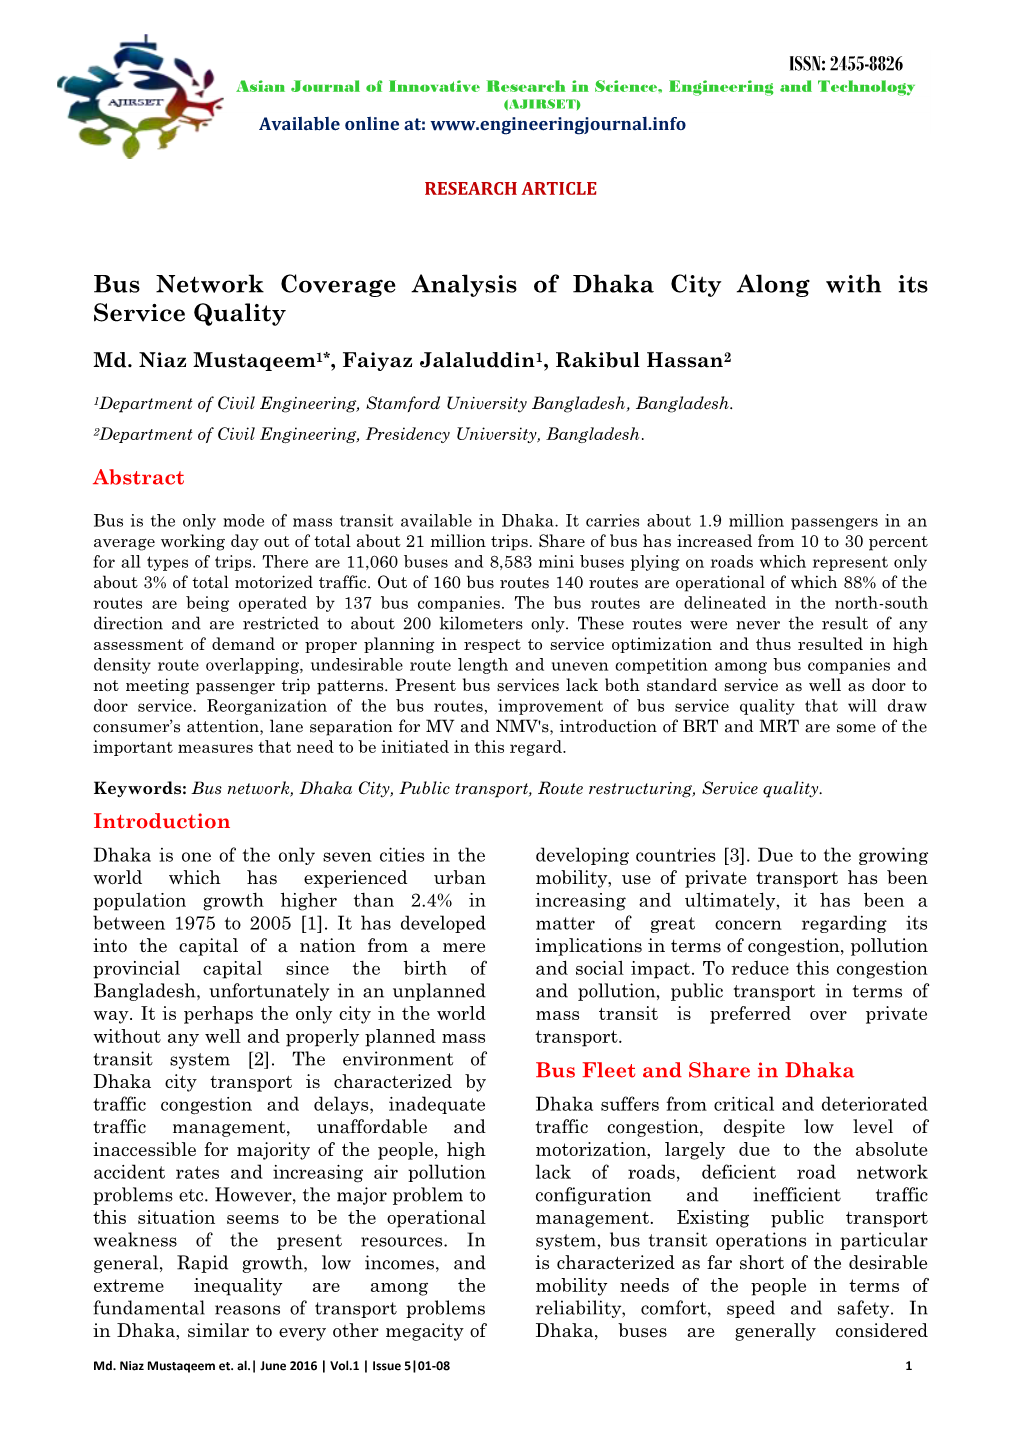 Bus Network Coverage Analysis of Dhaka City Along with Its Service Quality